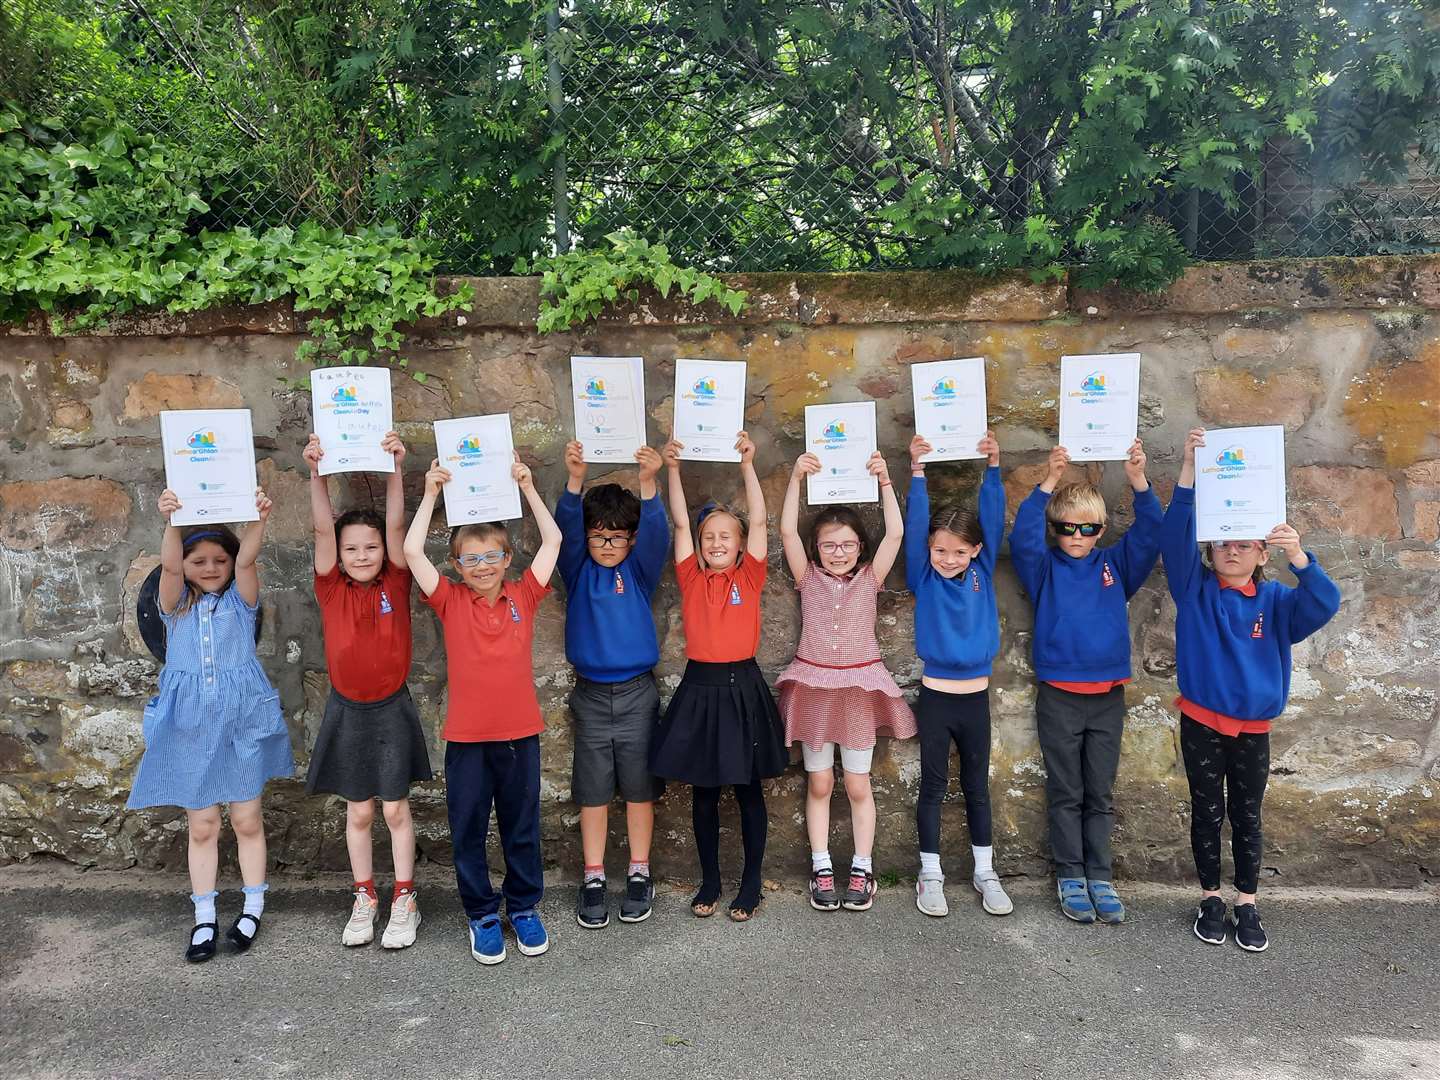 Pupils from Crown Primary with their Environment Protection Scotland colouring books with which they are learning about Clean Air Day.